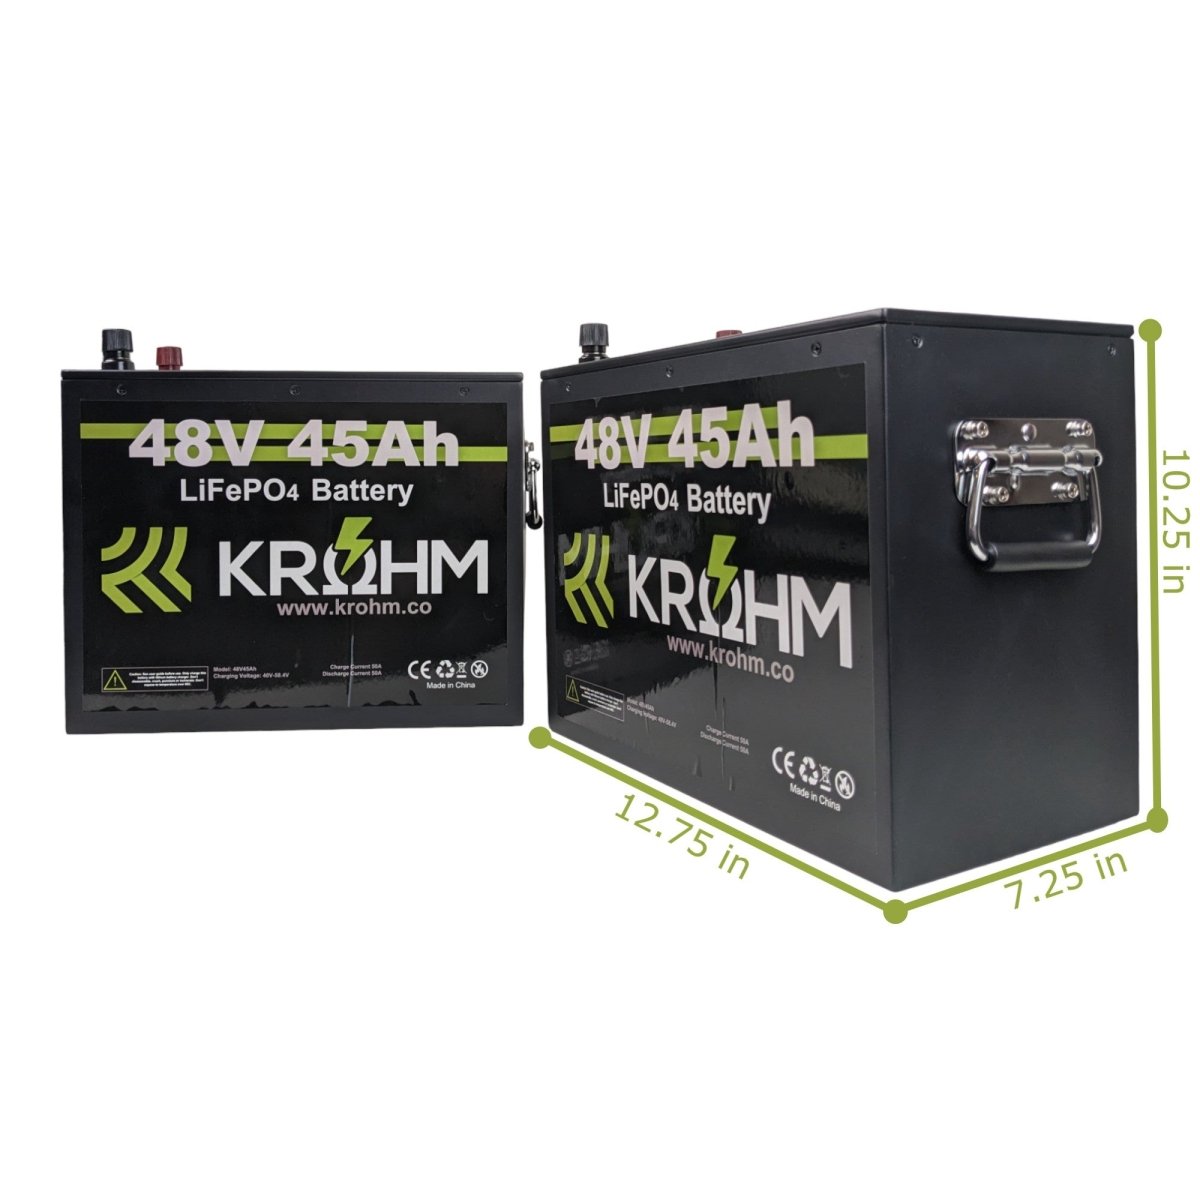 Krohm 48V 45Ah LiFePO4 Rechargeable Deep Cycle Battery With Dedicated